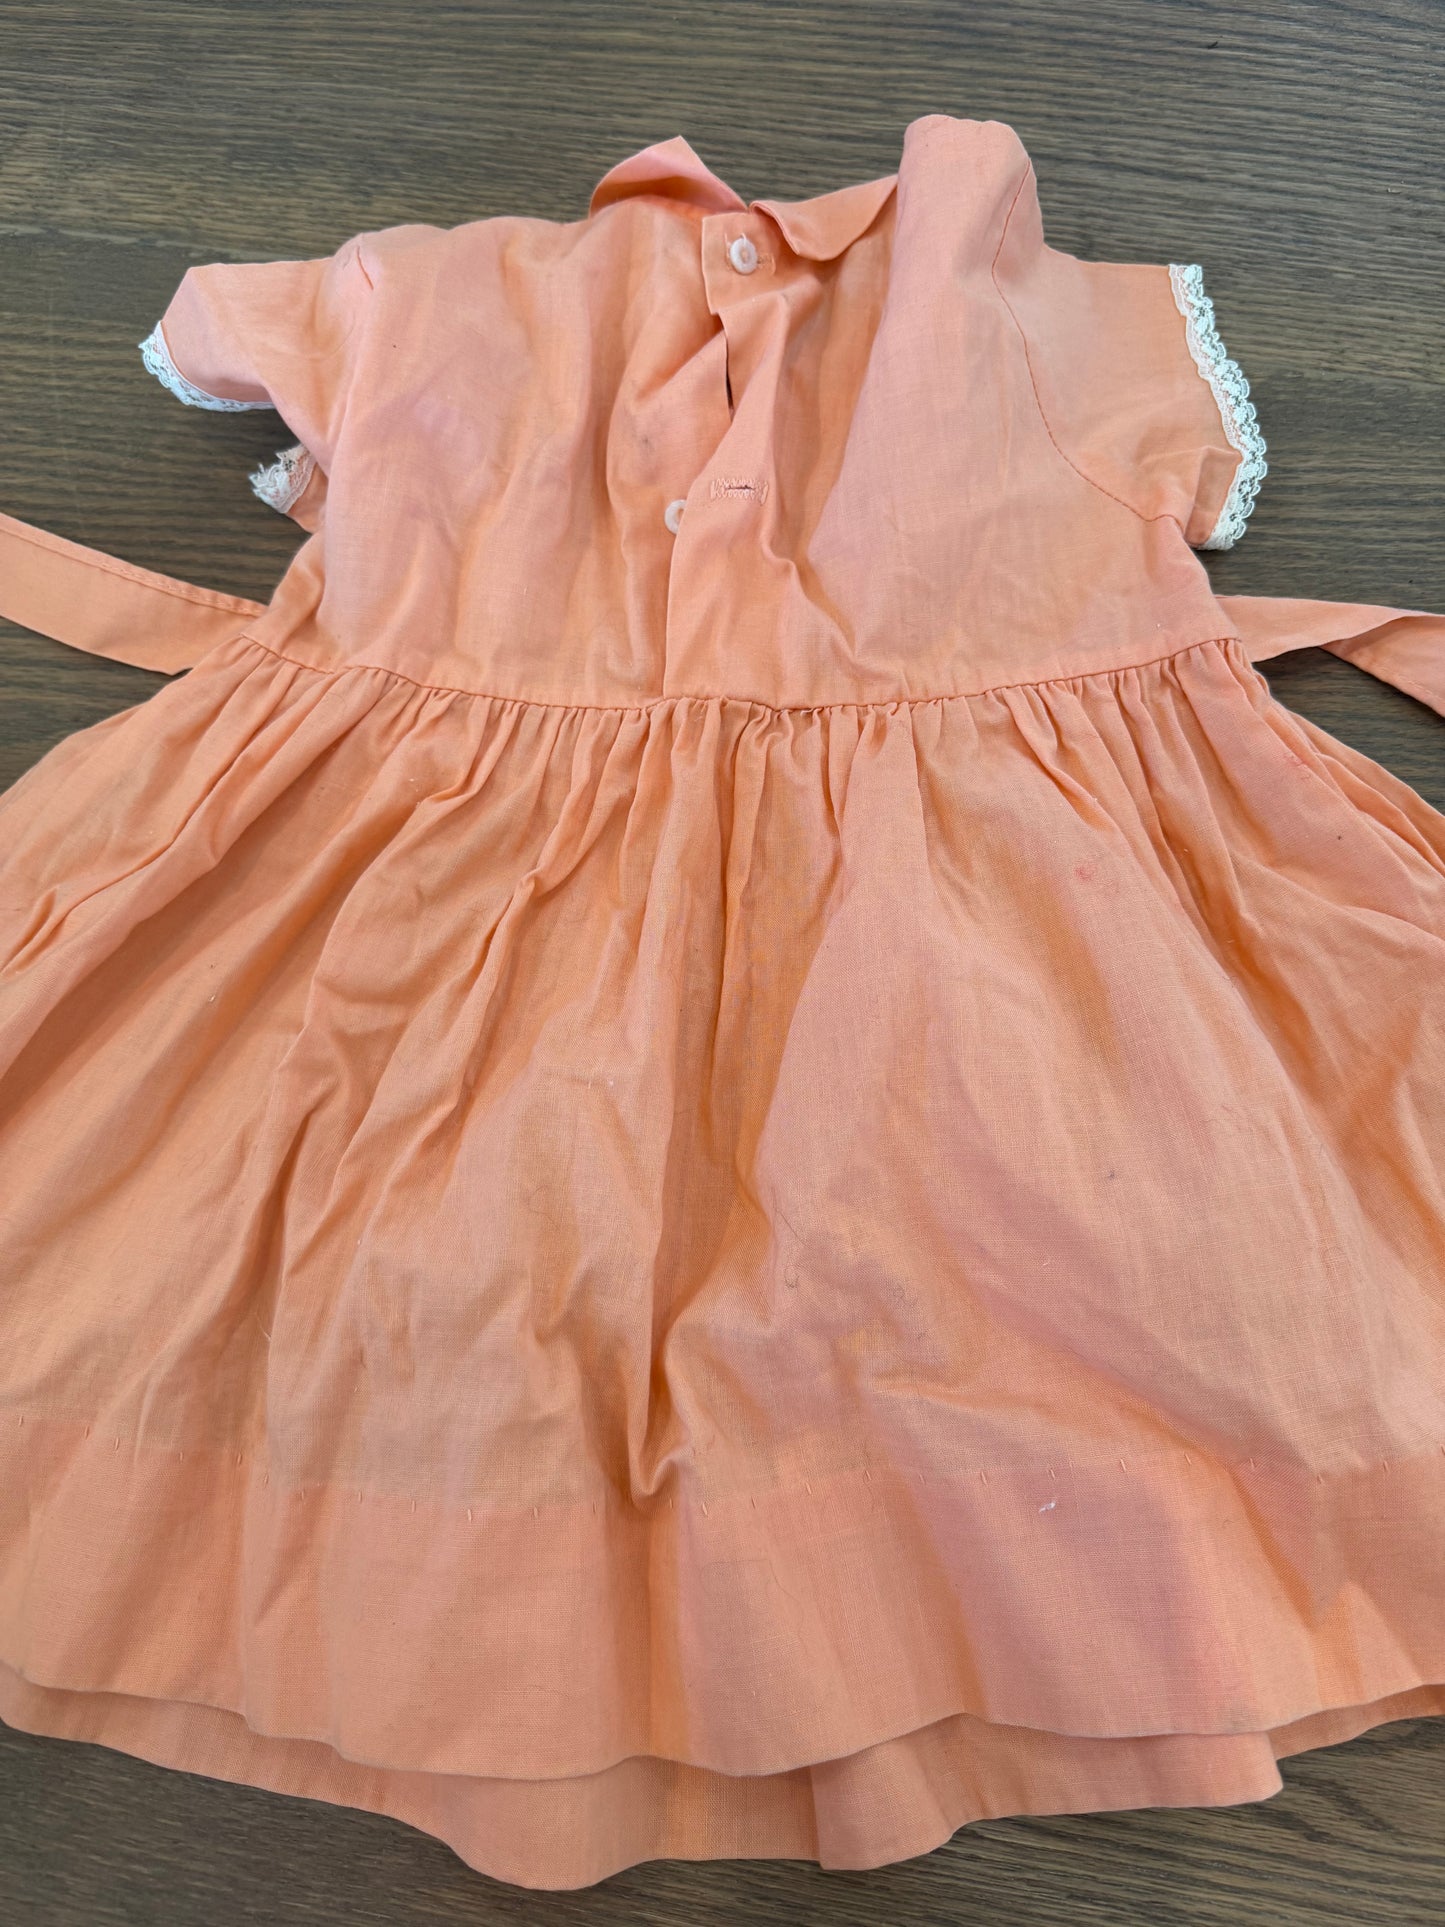 Vintage Homemade Smocked Baby Dress est 3-6mo Good Condition